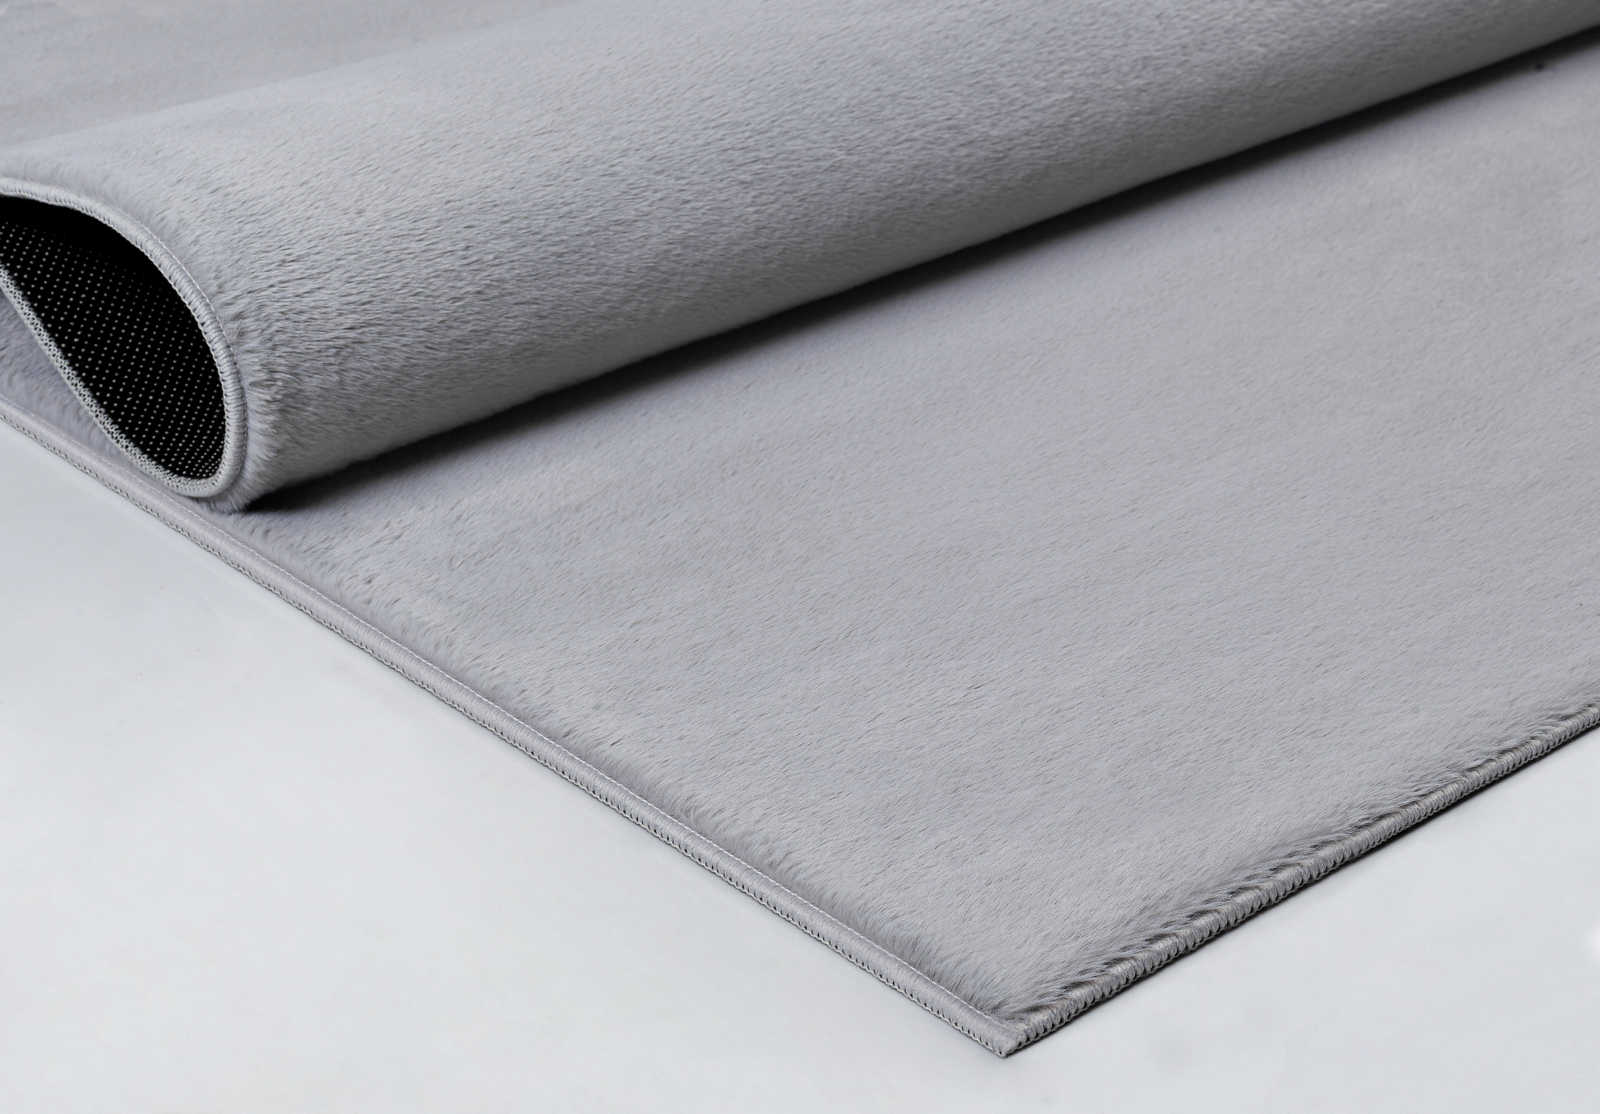             Comfortable high pile carpet in soft grey - 100 x 50 cm
        